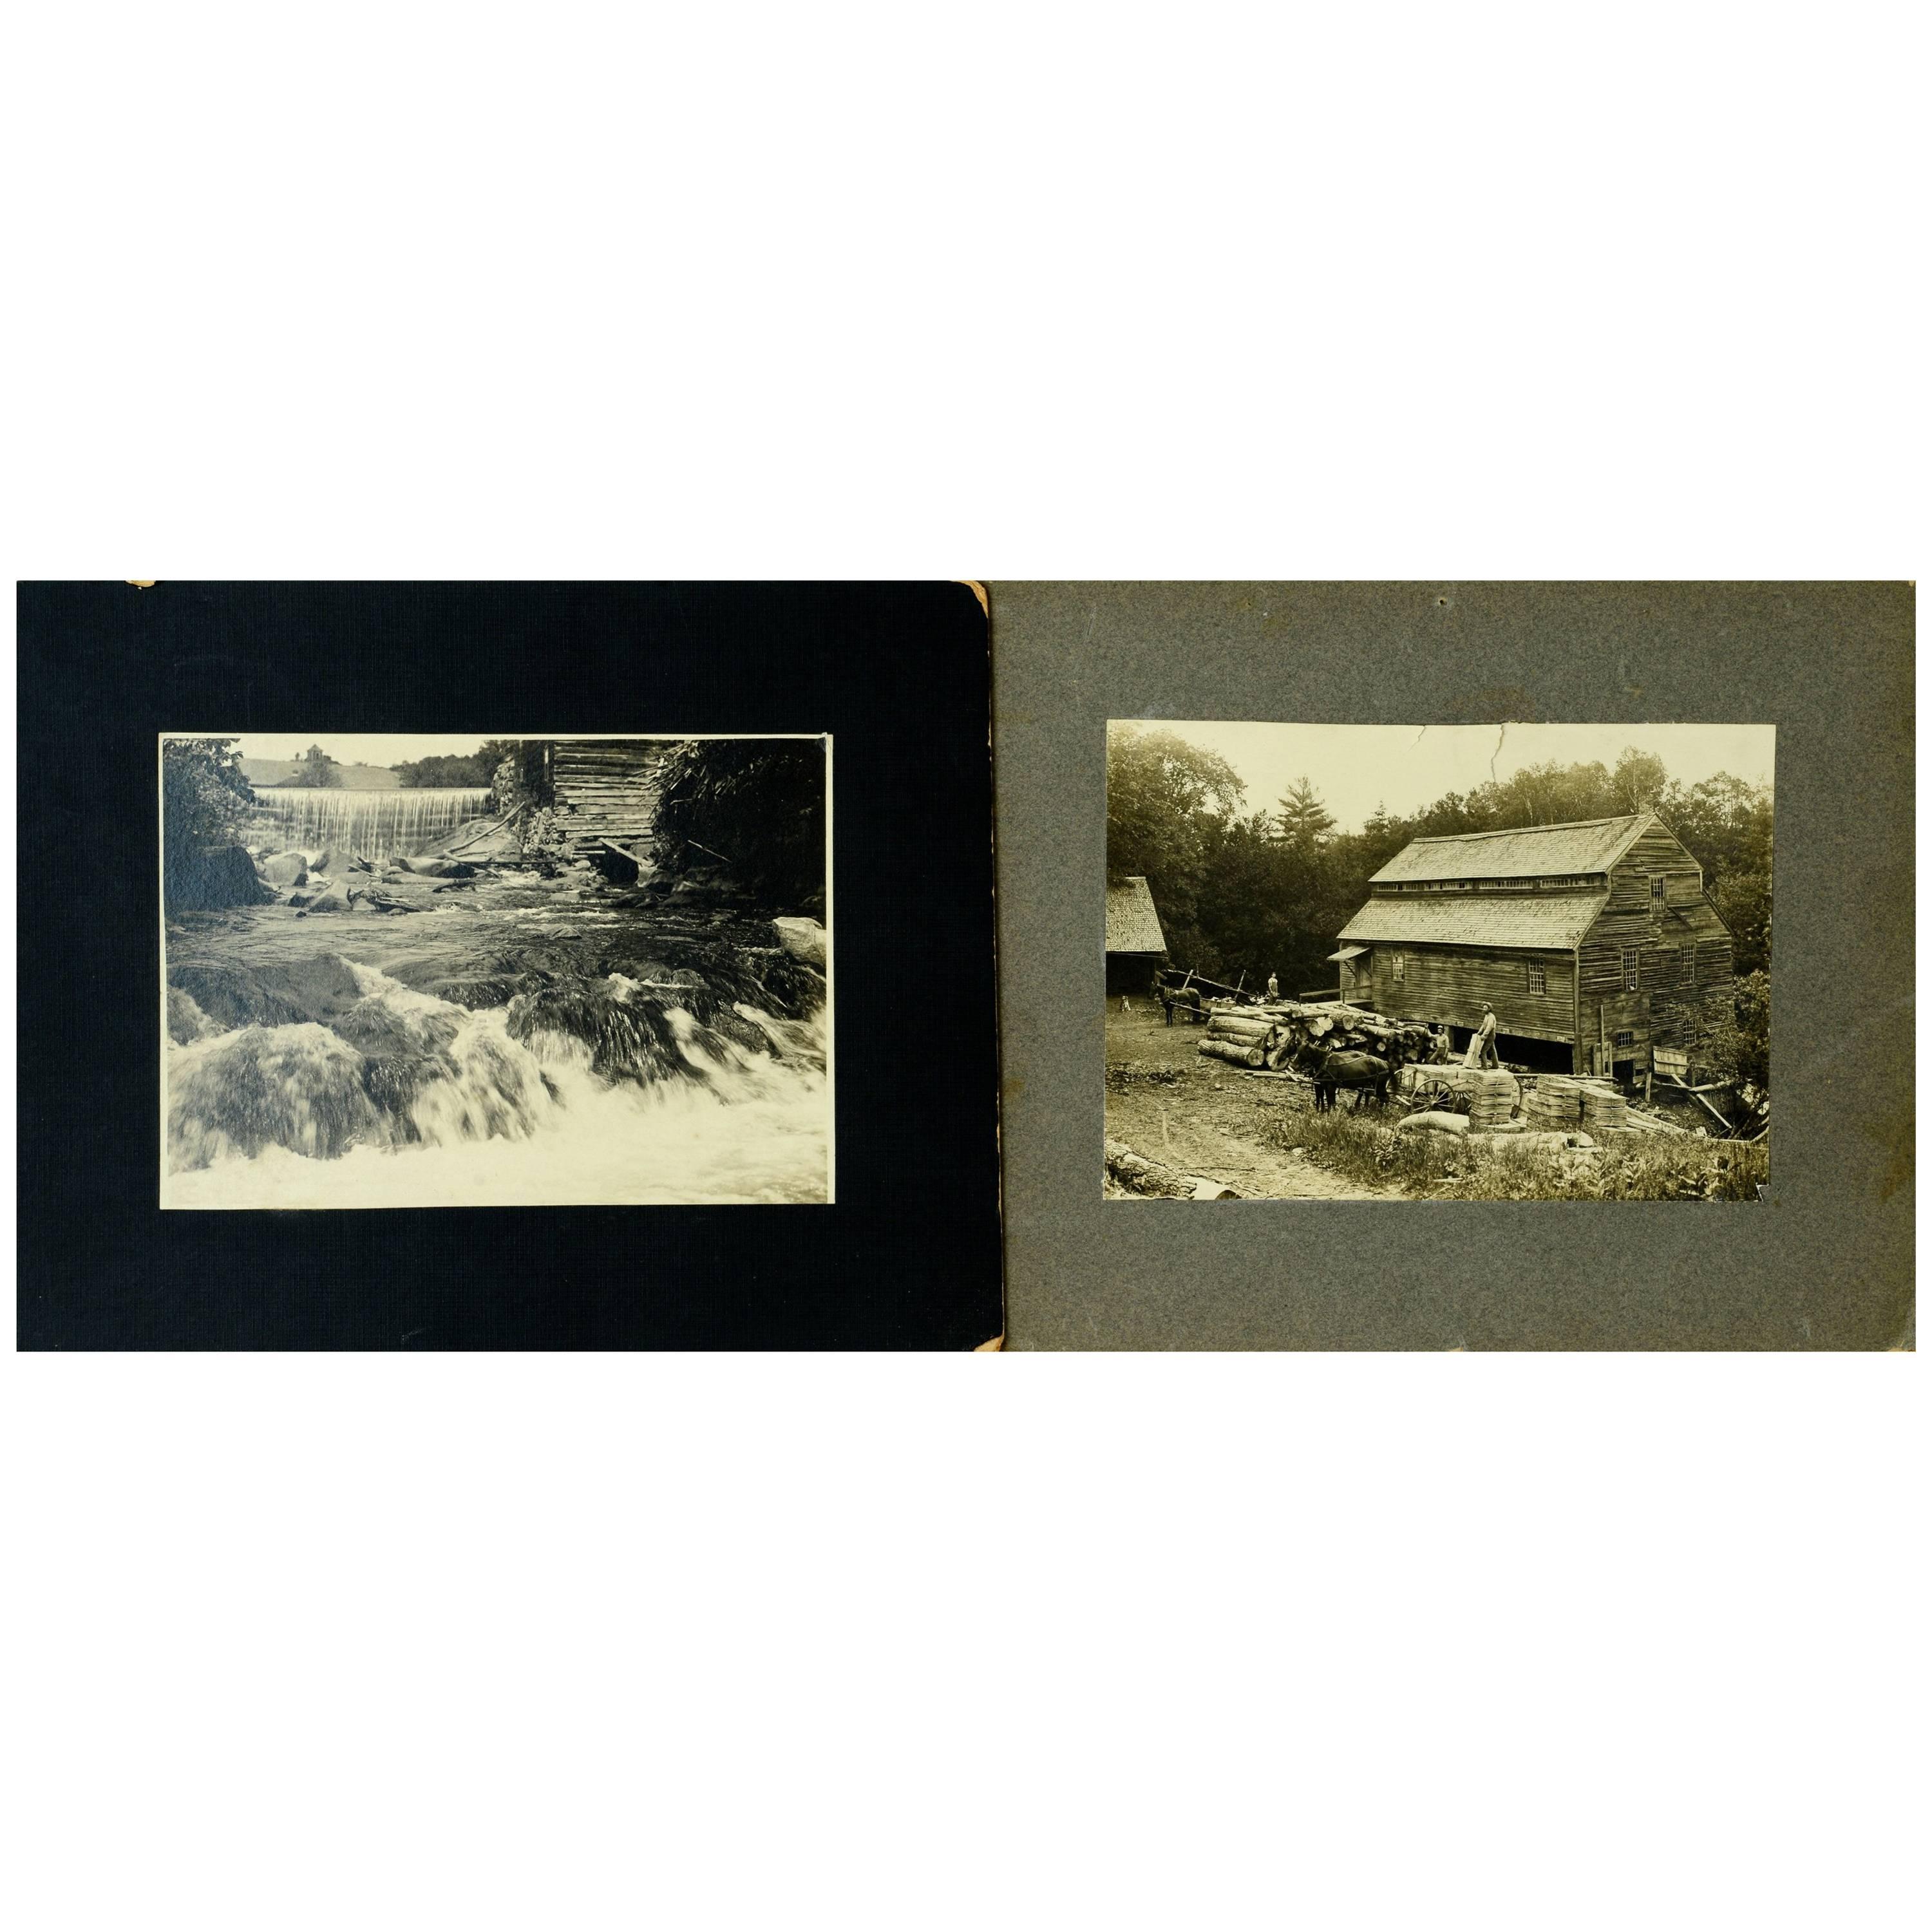 Pair of Photographs, Harold E. Hatch, Danville, VT, Late 19th-Early 20th Century